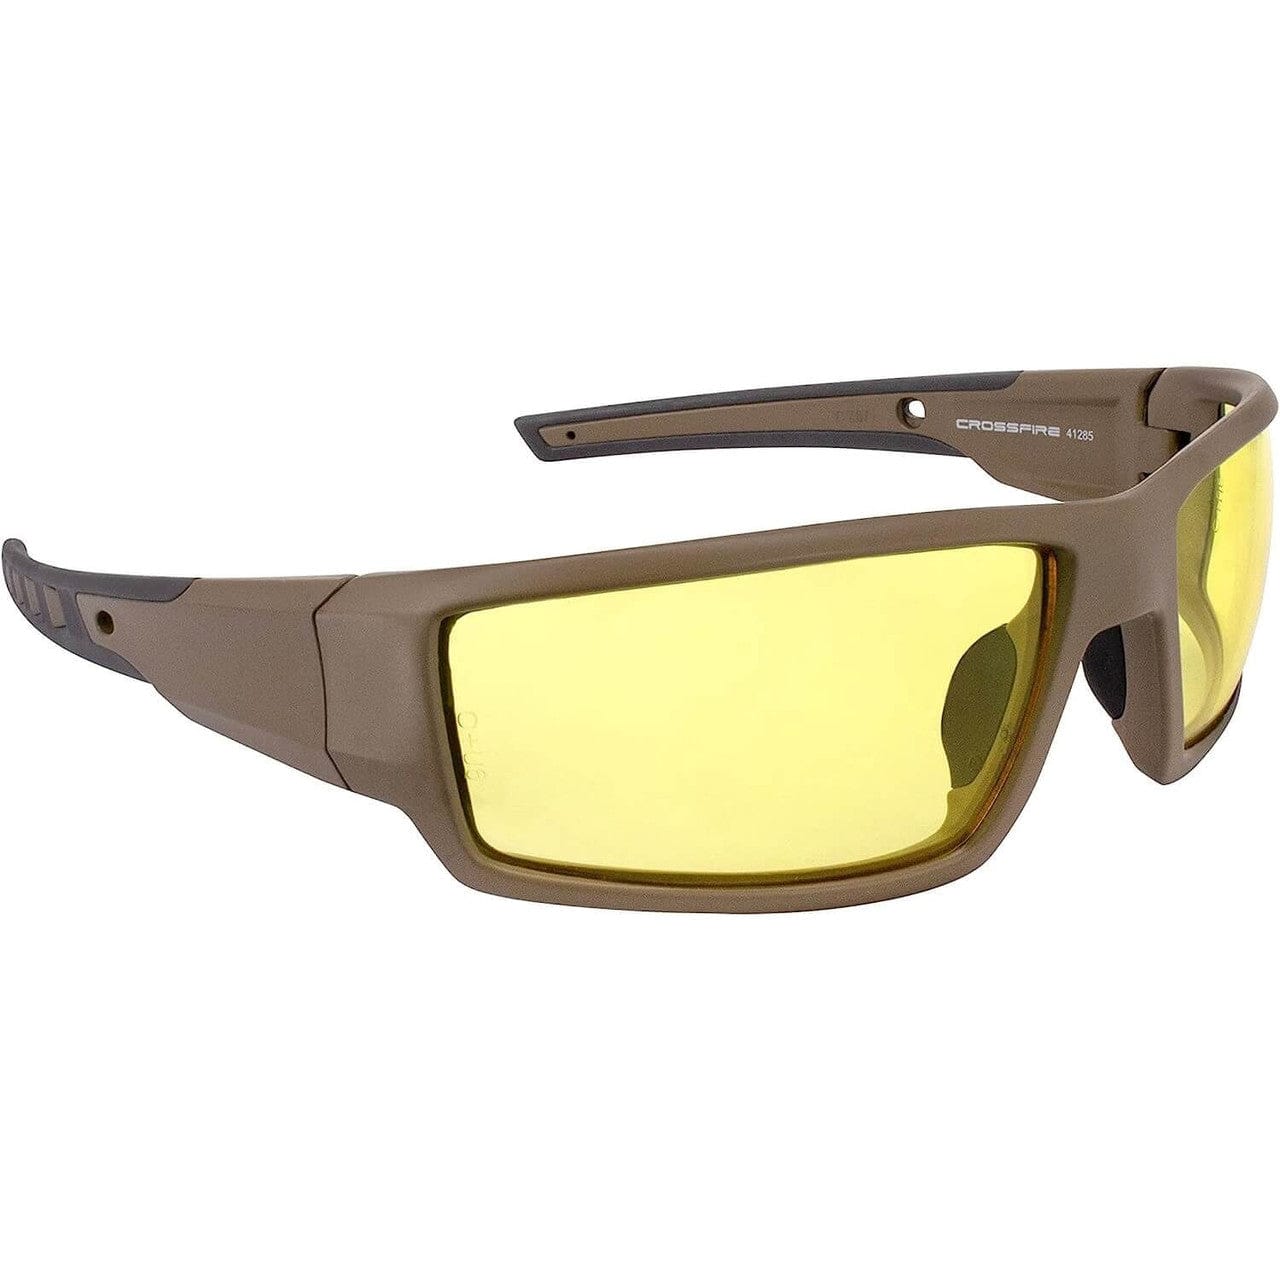 Crossfire Cumulus Safety Glasses Camo Frame Gold Mirror Lens